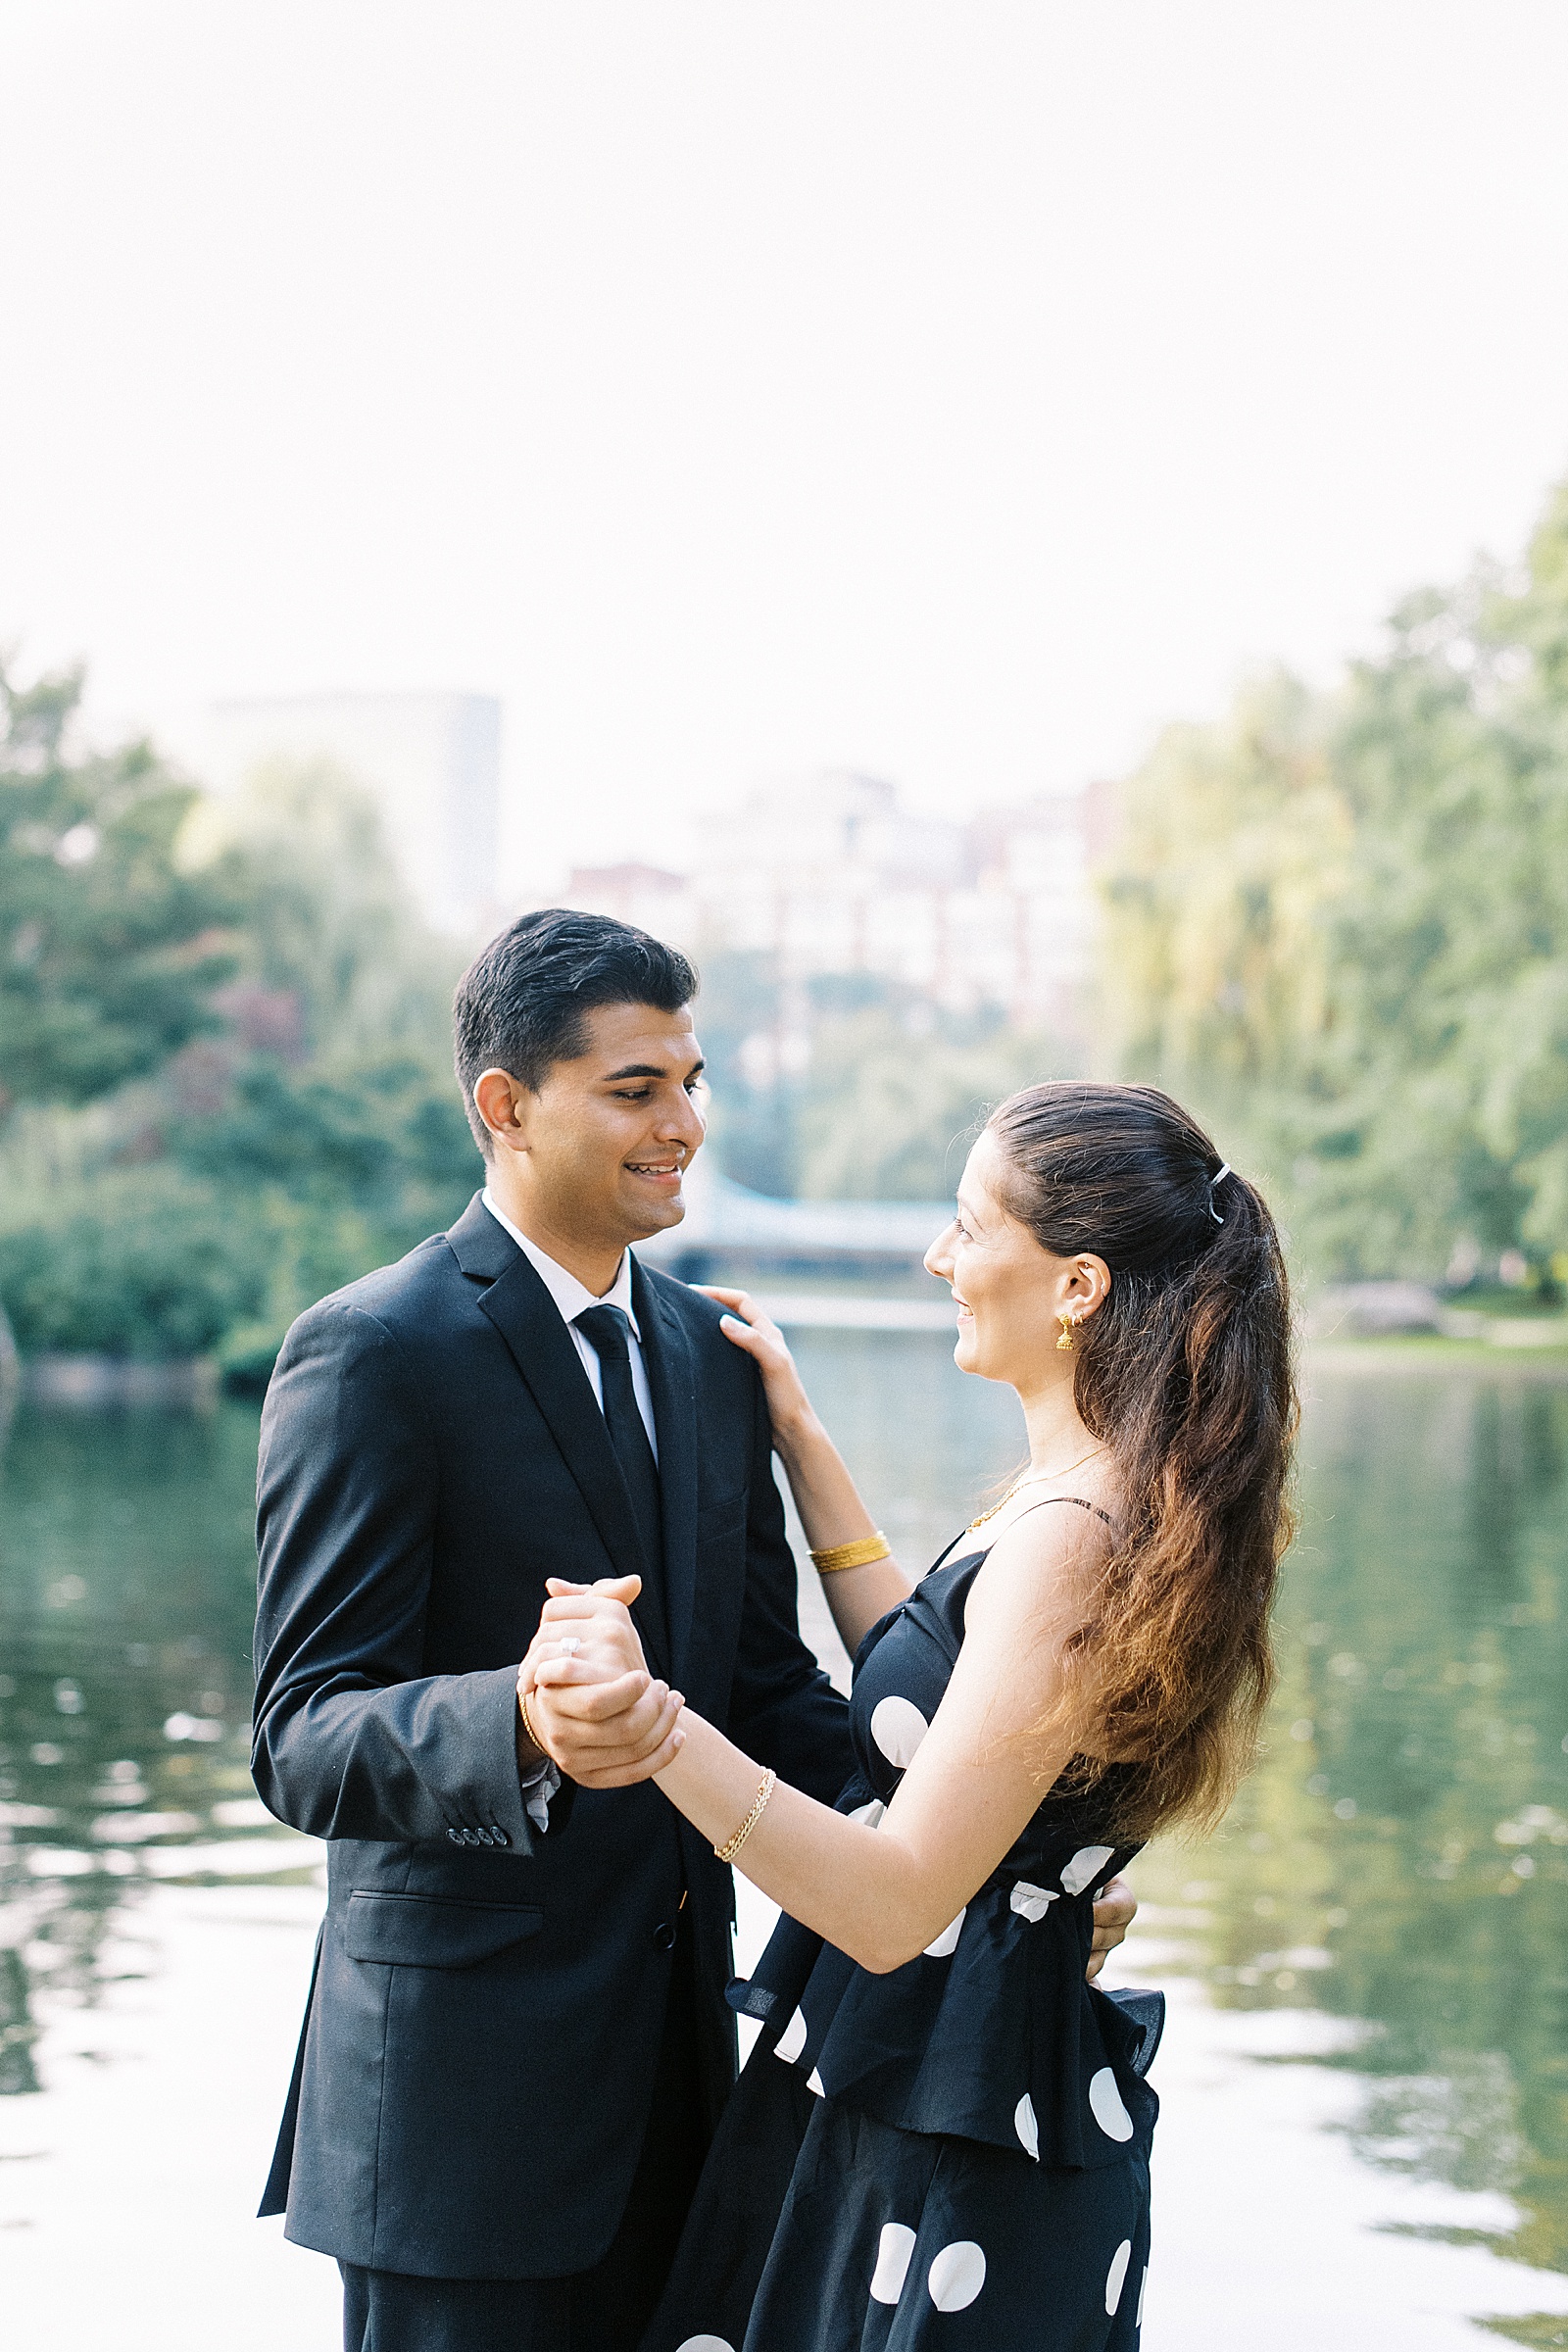 Engaged couple dancing next to pond in Massachusetts by Lynne Reznick photography 